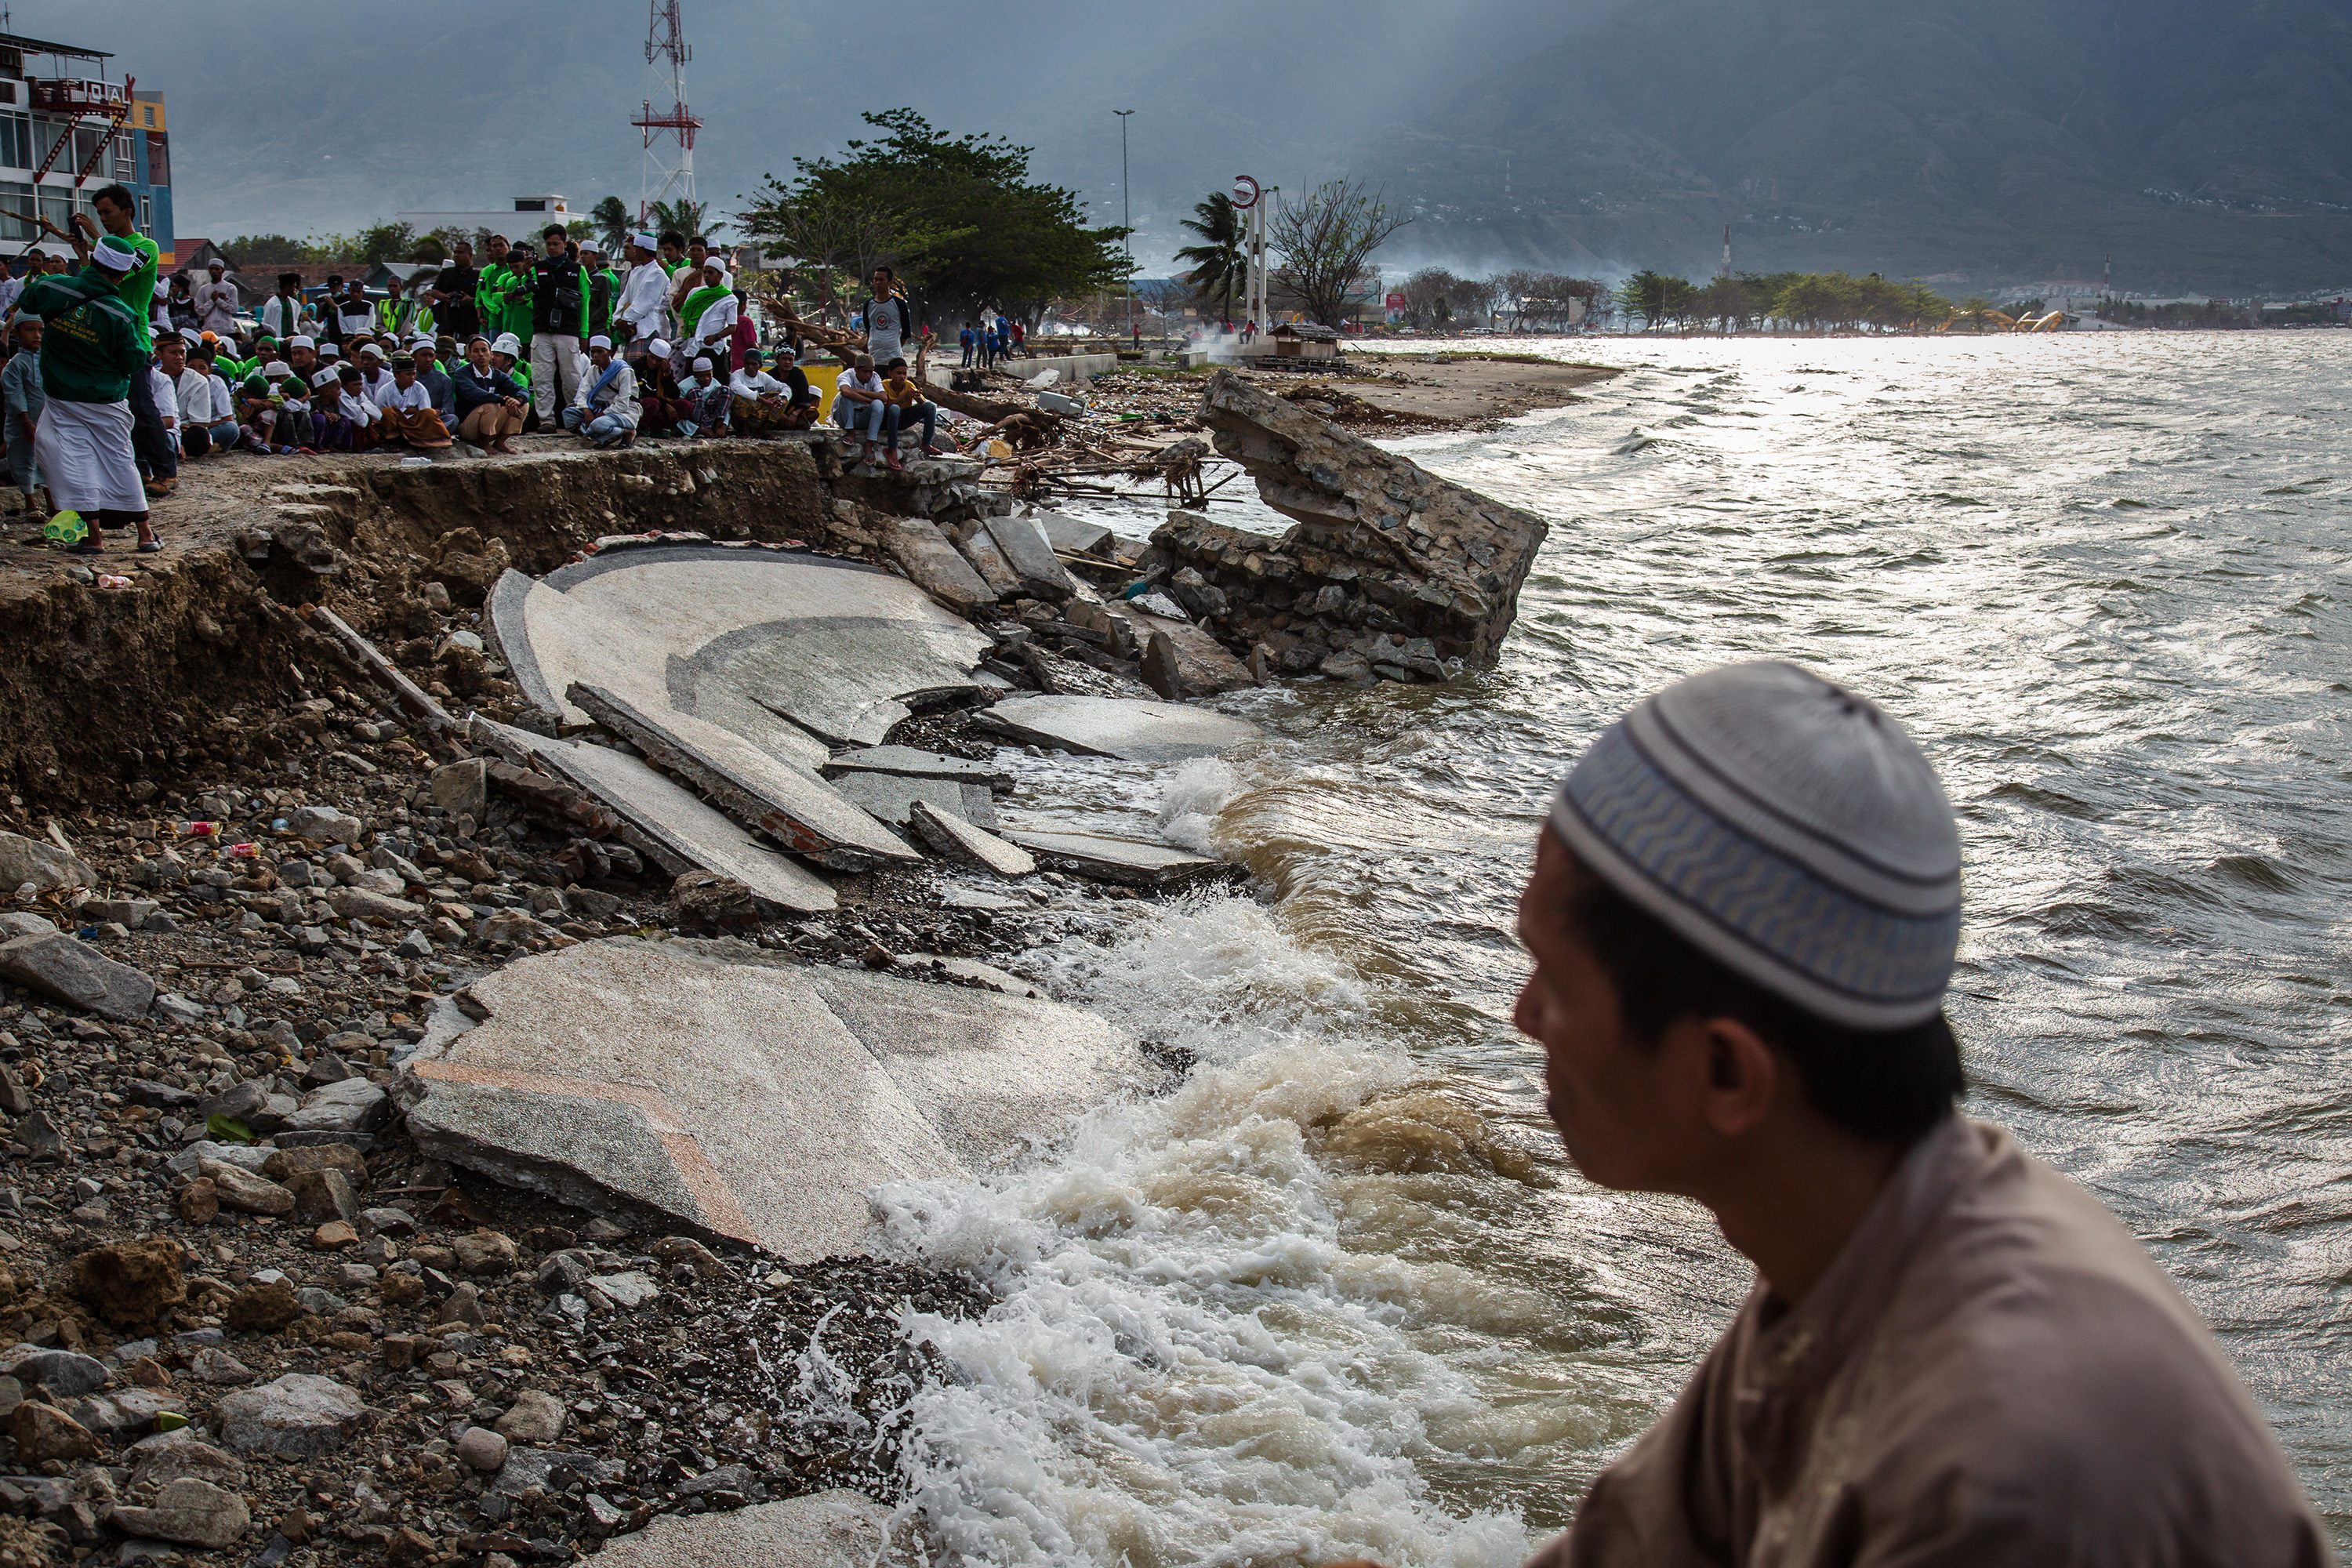 People attend mass prayer on Talise beach after being hit by a tsunami on October 12, 2018 in Palu, Indonesia. Photo by Ulet Ifansasti/Getty Images.